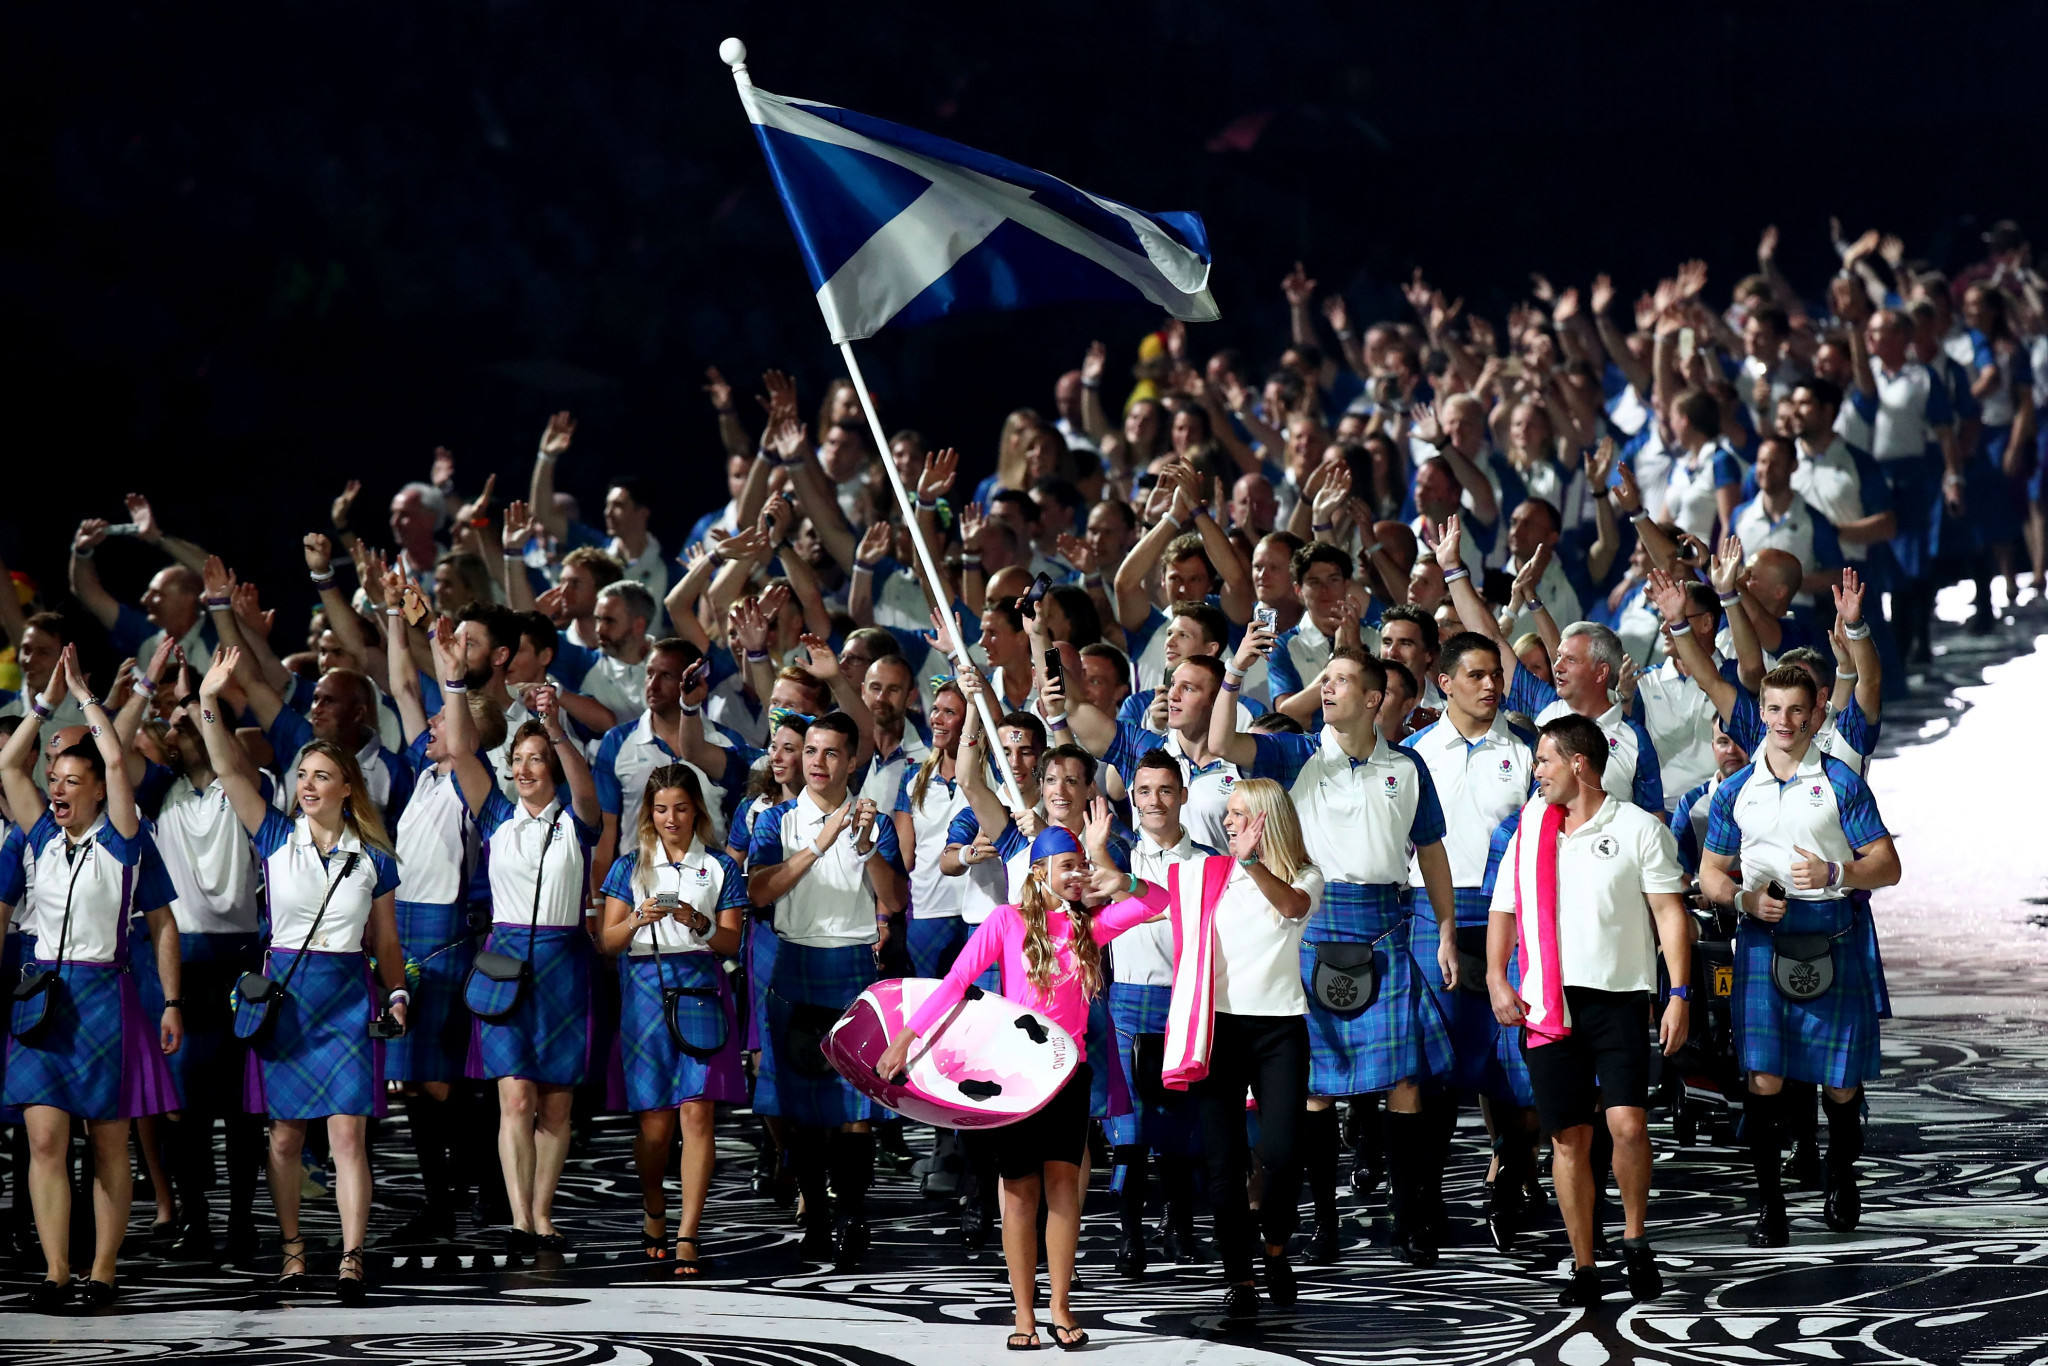 Scotland placed eighth on the medals table at the Gold Coast 2018 Commonwealth Games ©Getty Images